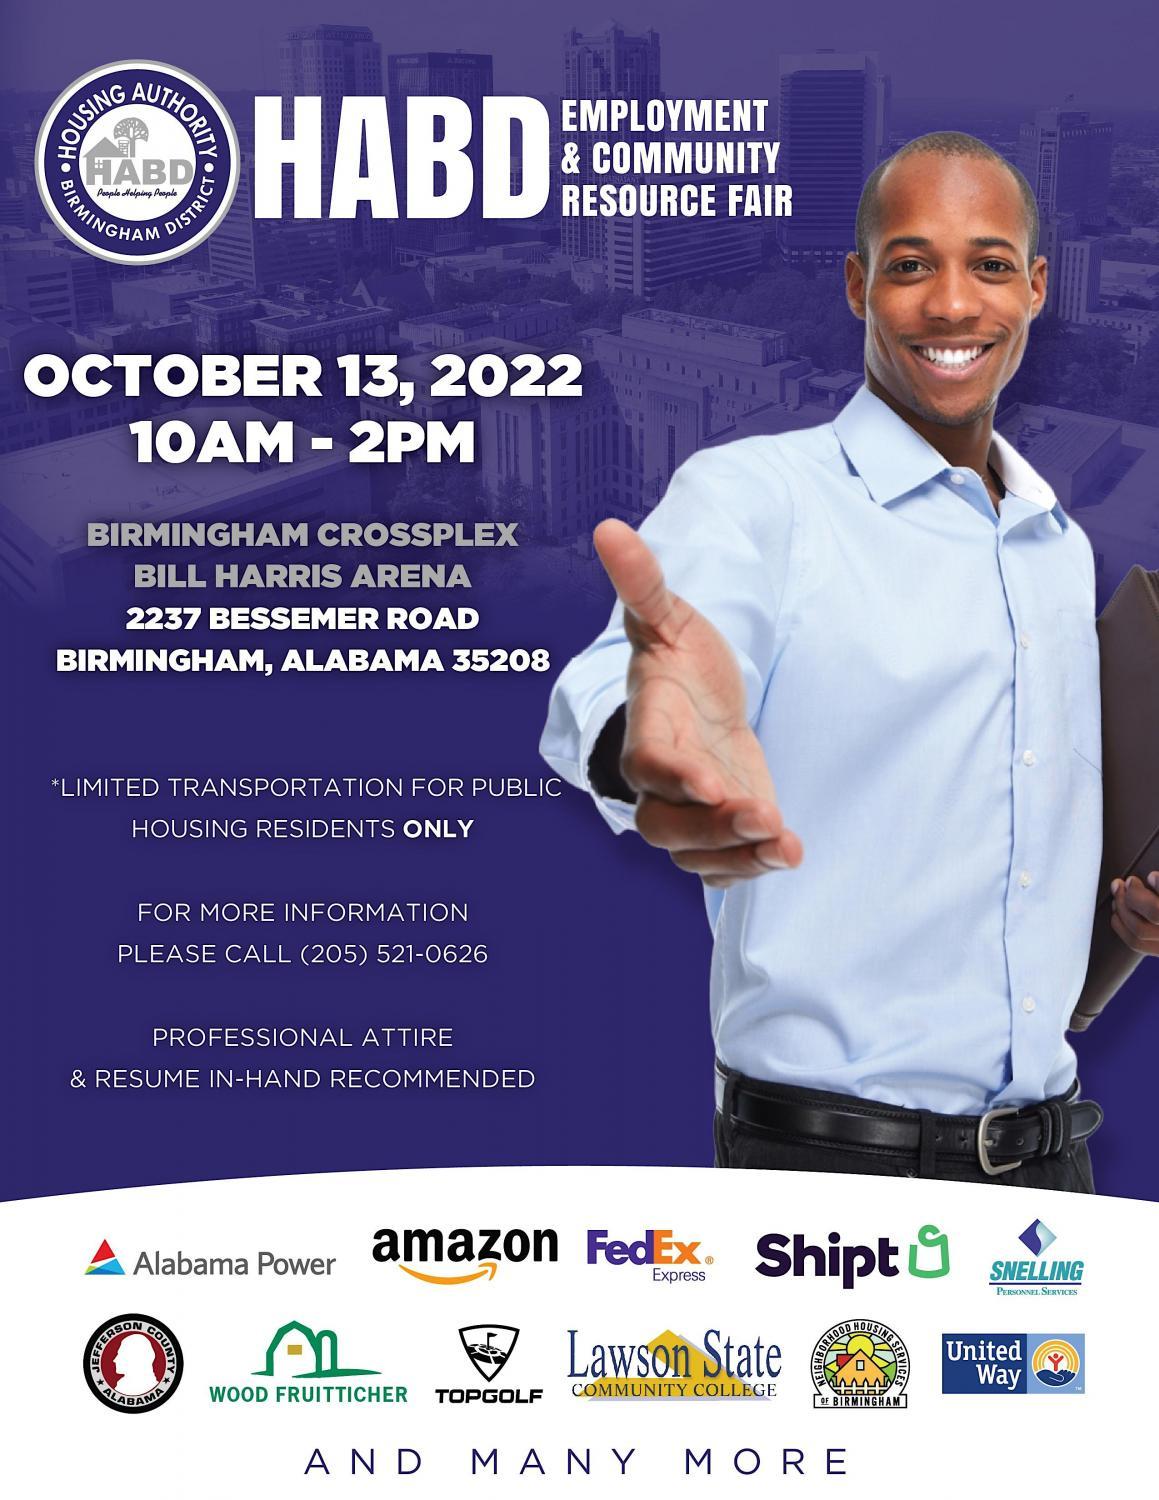 HABD's 2022 Employment and Community Resource Fair
Thu Oct 13, 10:00 AM - Thu Oct 13, 2:00 PM